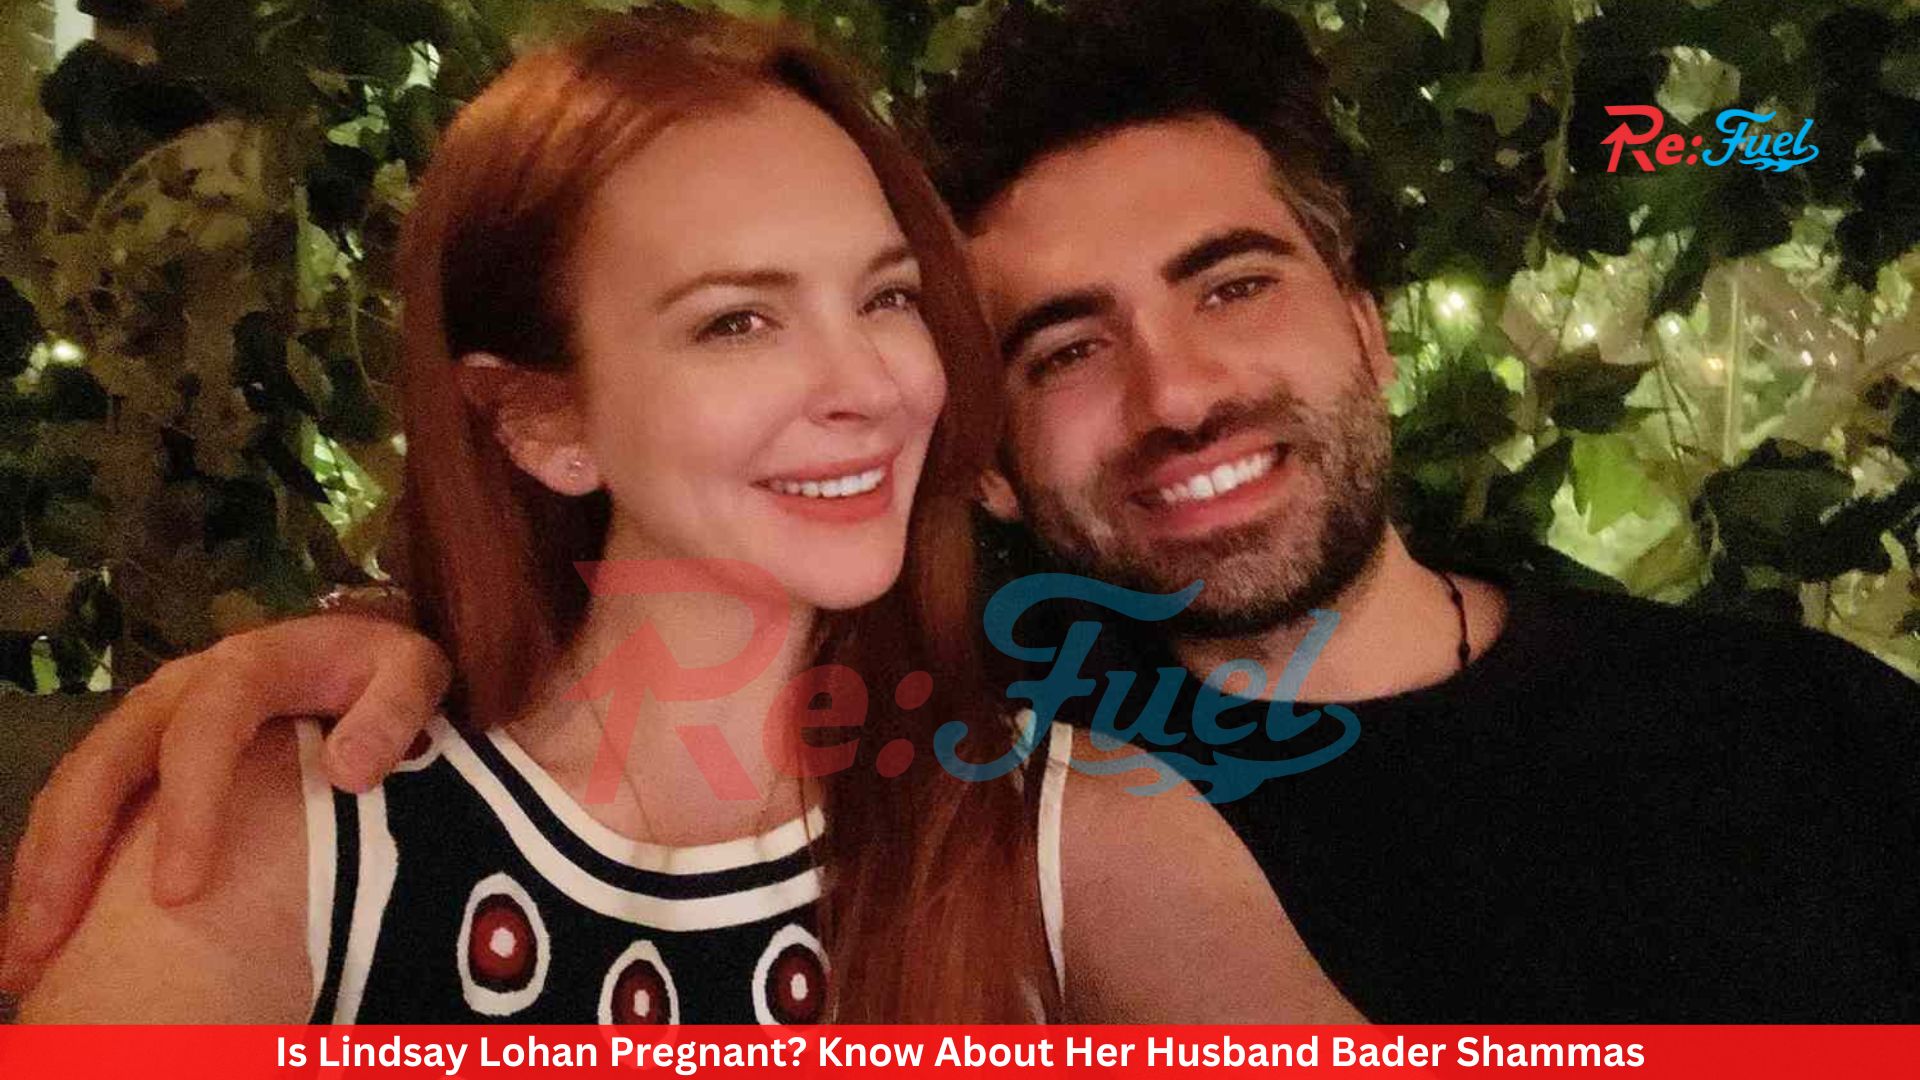 Is Lindsay Lohan Pregnant? Know About Her Husband Bader Shammas